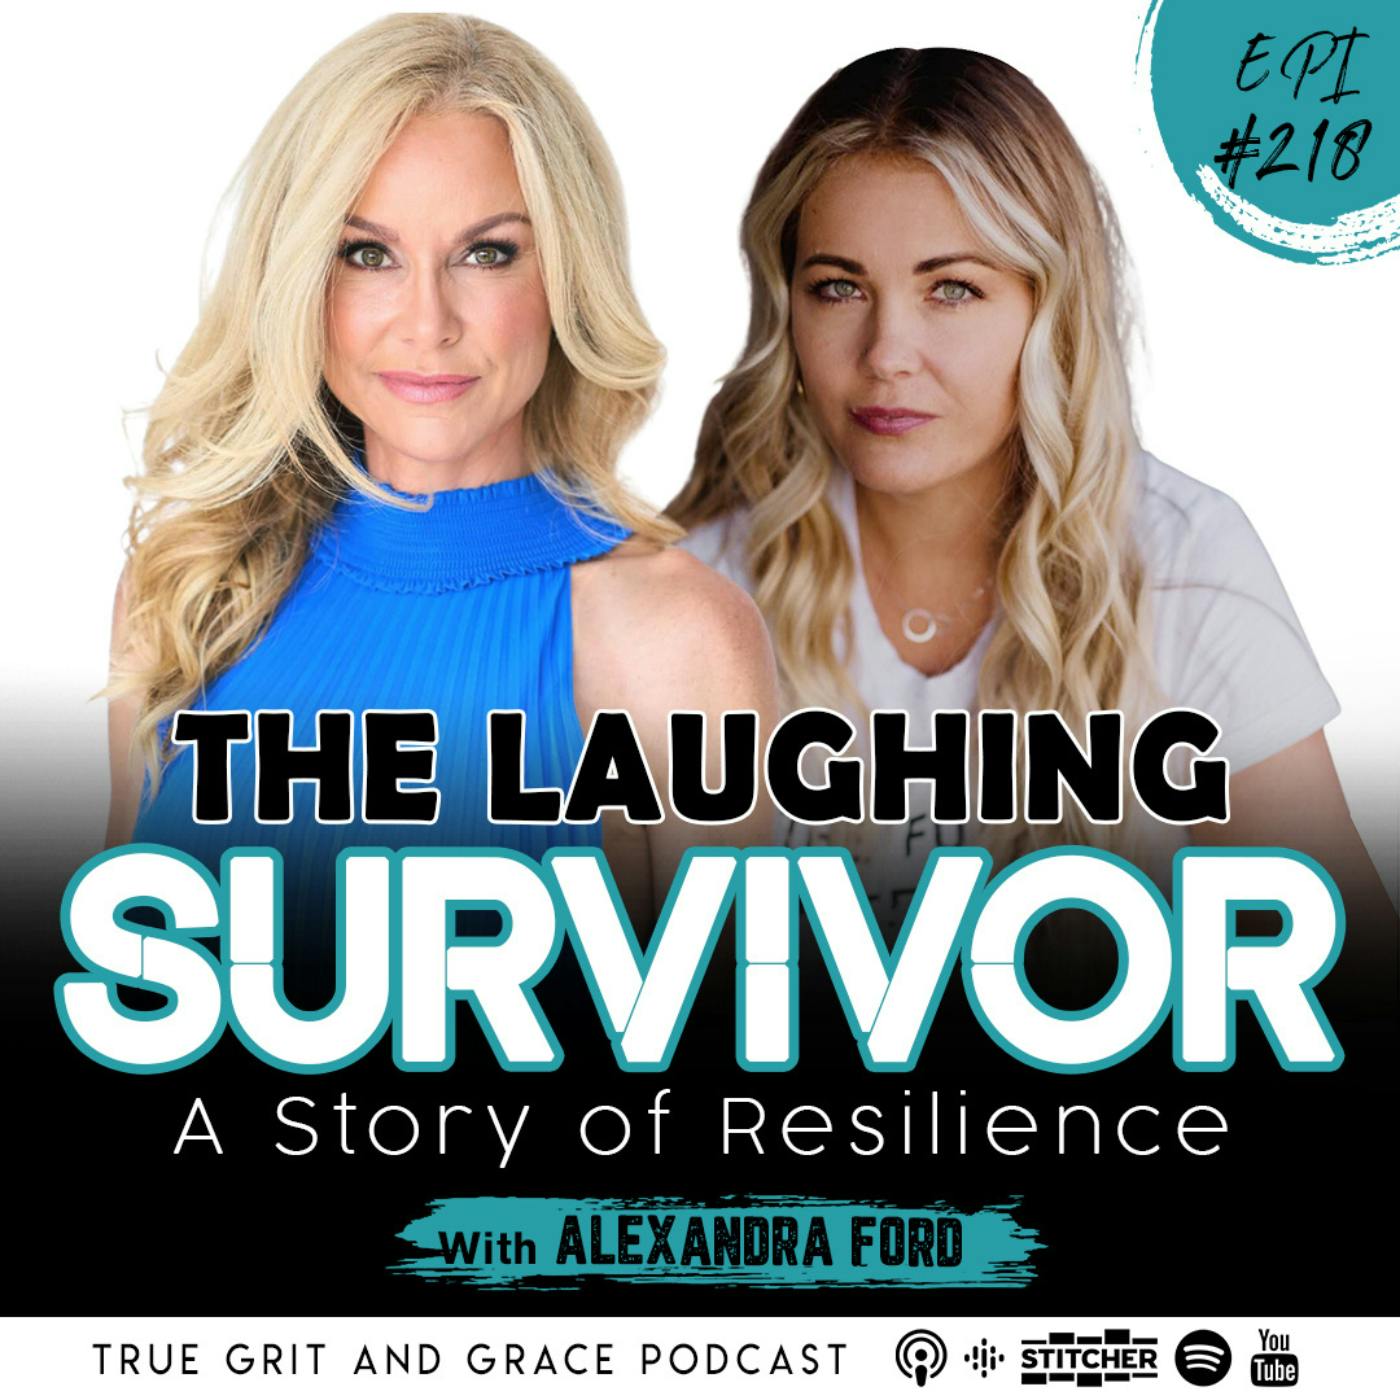 The Laughing Survivor: A Story of Resilience with Alexandra Ford